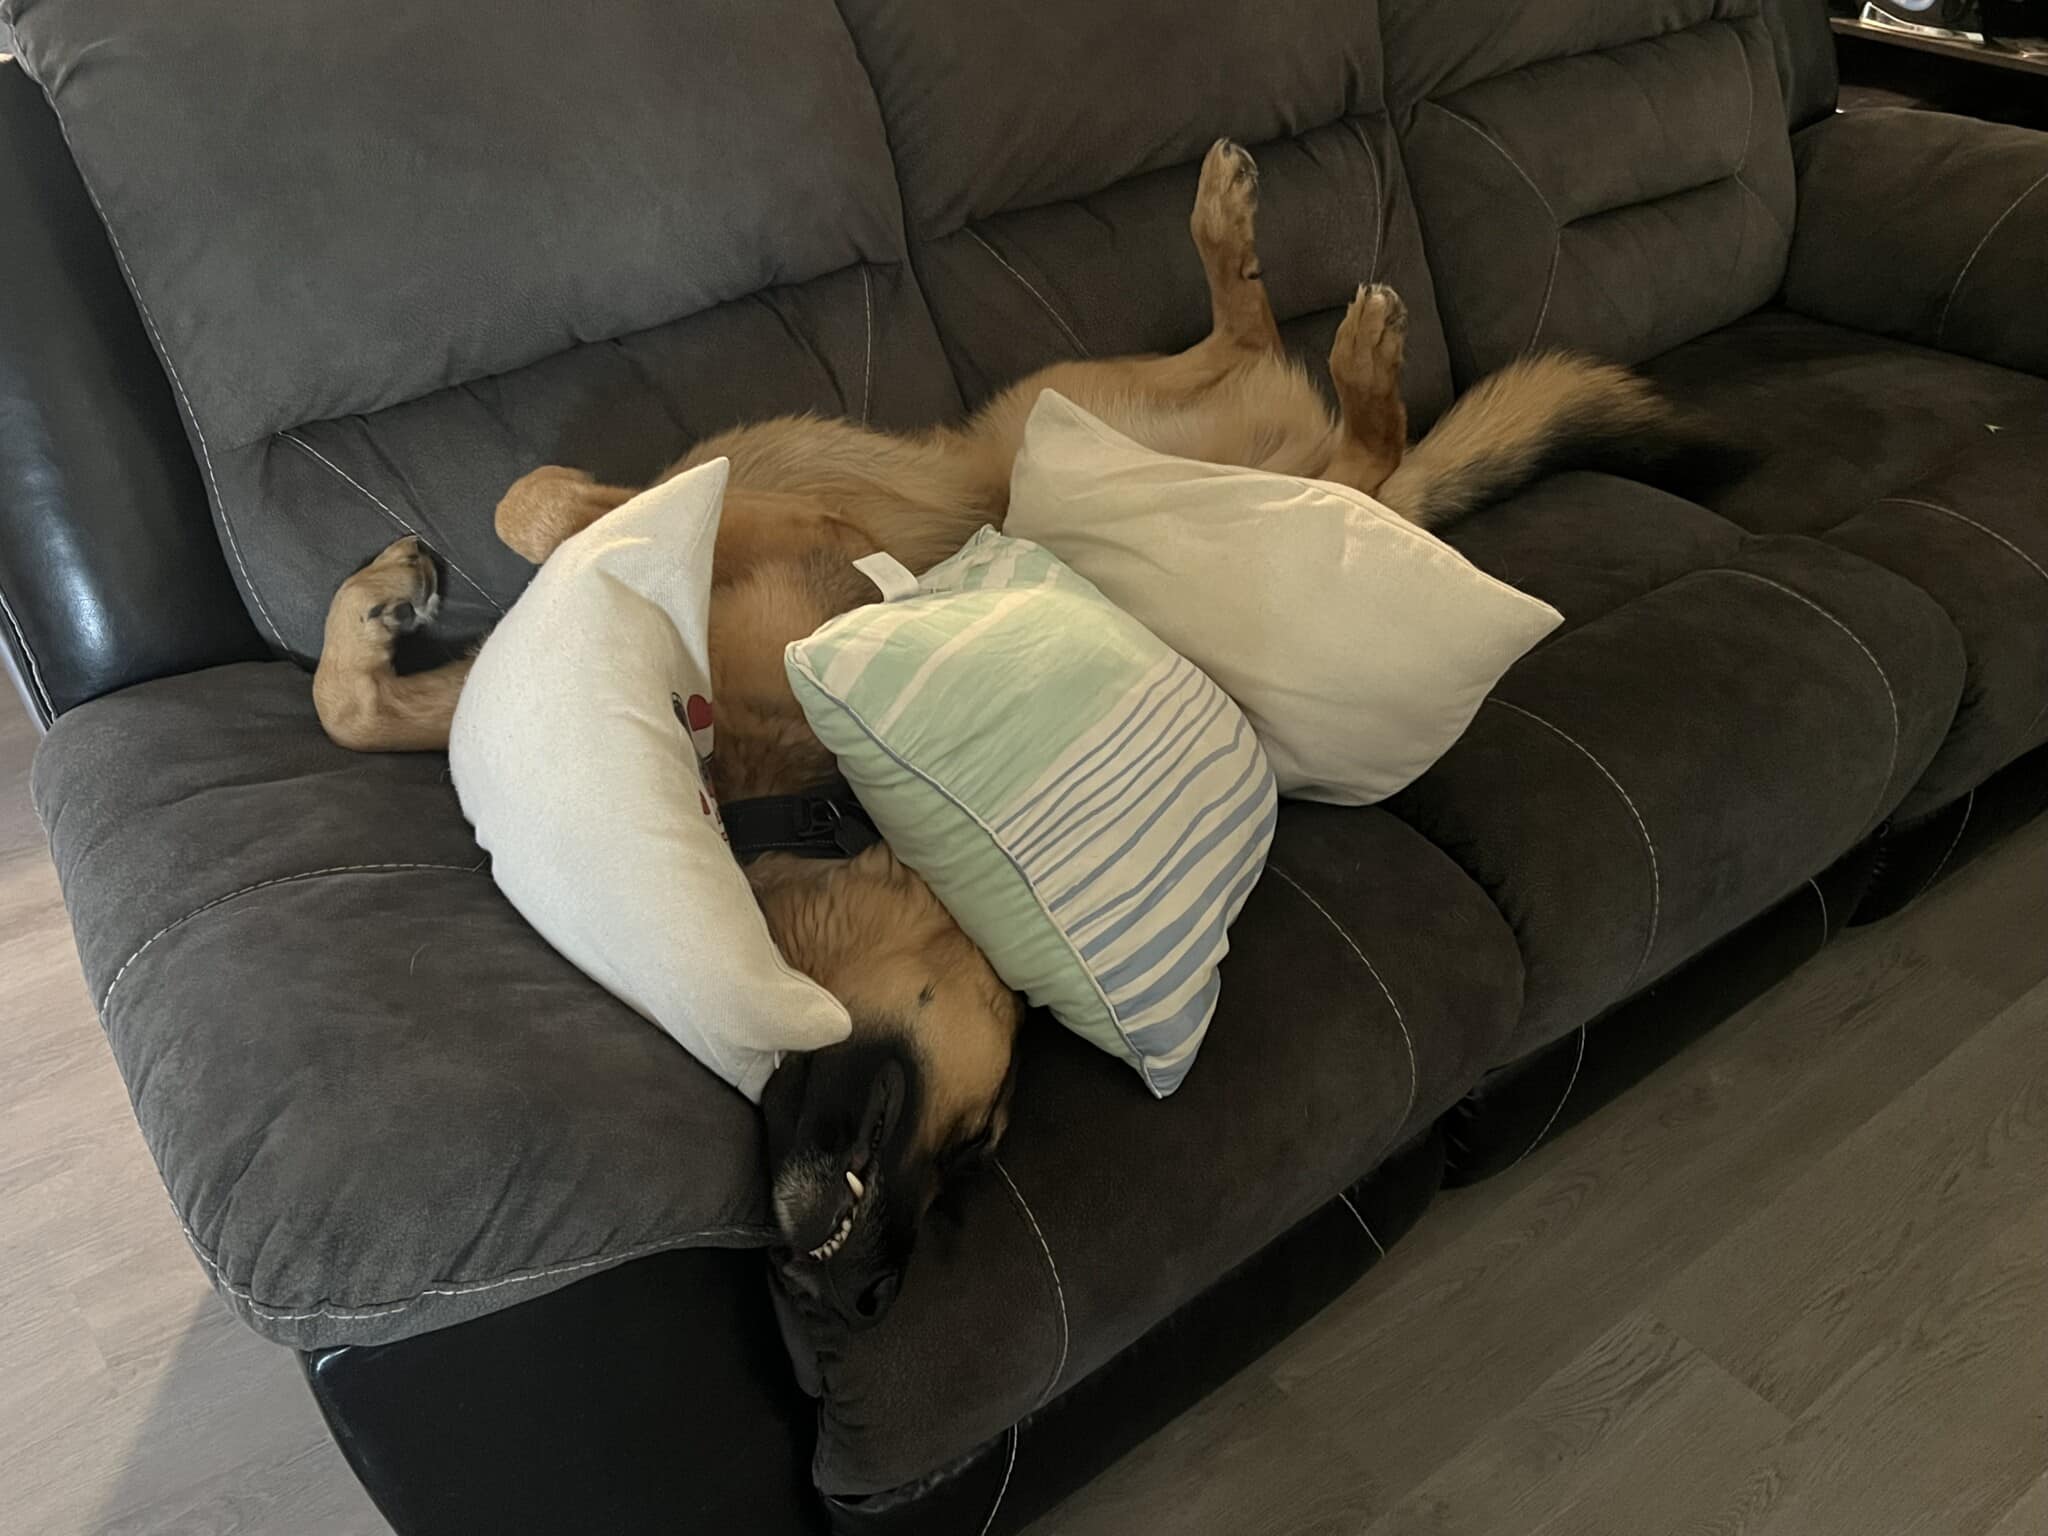 German Shepherd dog rolls on his back on a gray sofa between several pillows